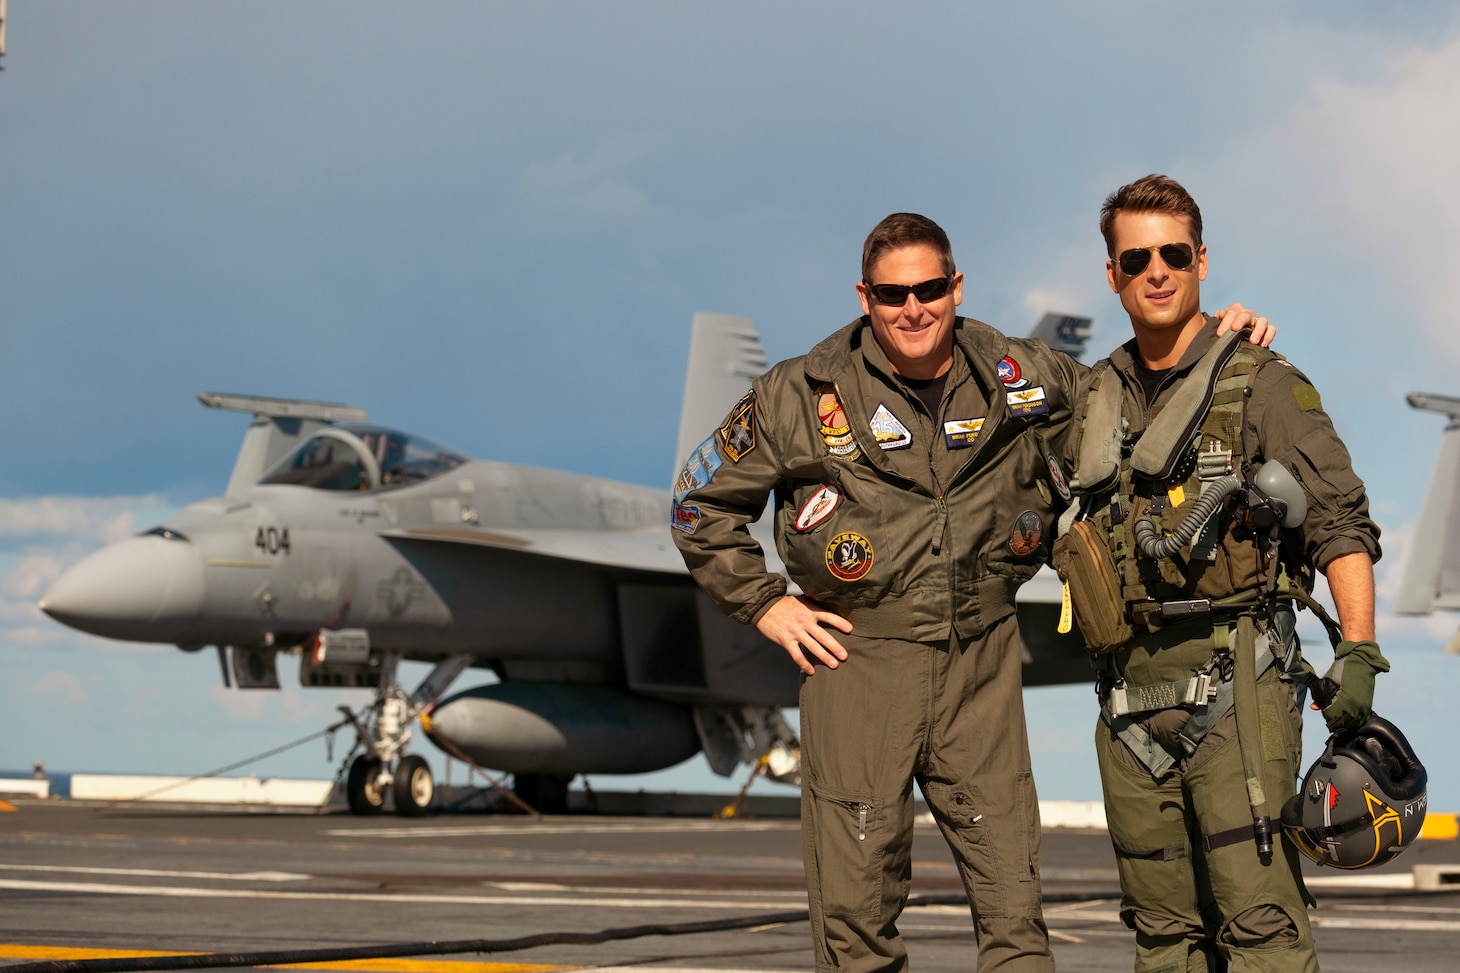 Navy Aerial Advisor Capt. Brian Ferguson and Glen Powell on the set of Top Gun: Maverick by Paramount Pictures, Skydance and Jerry Bruckheimer Films.